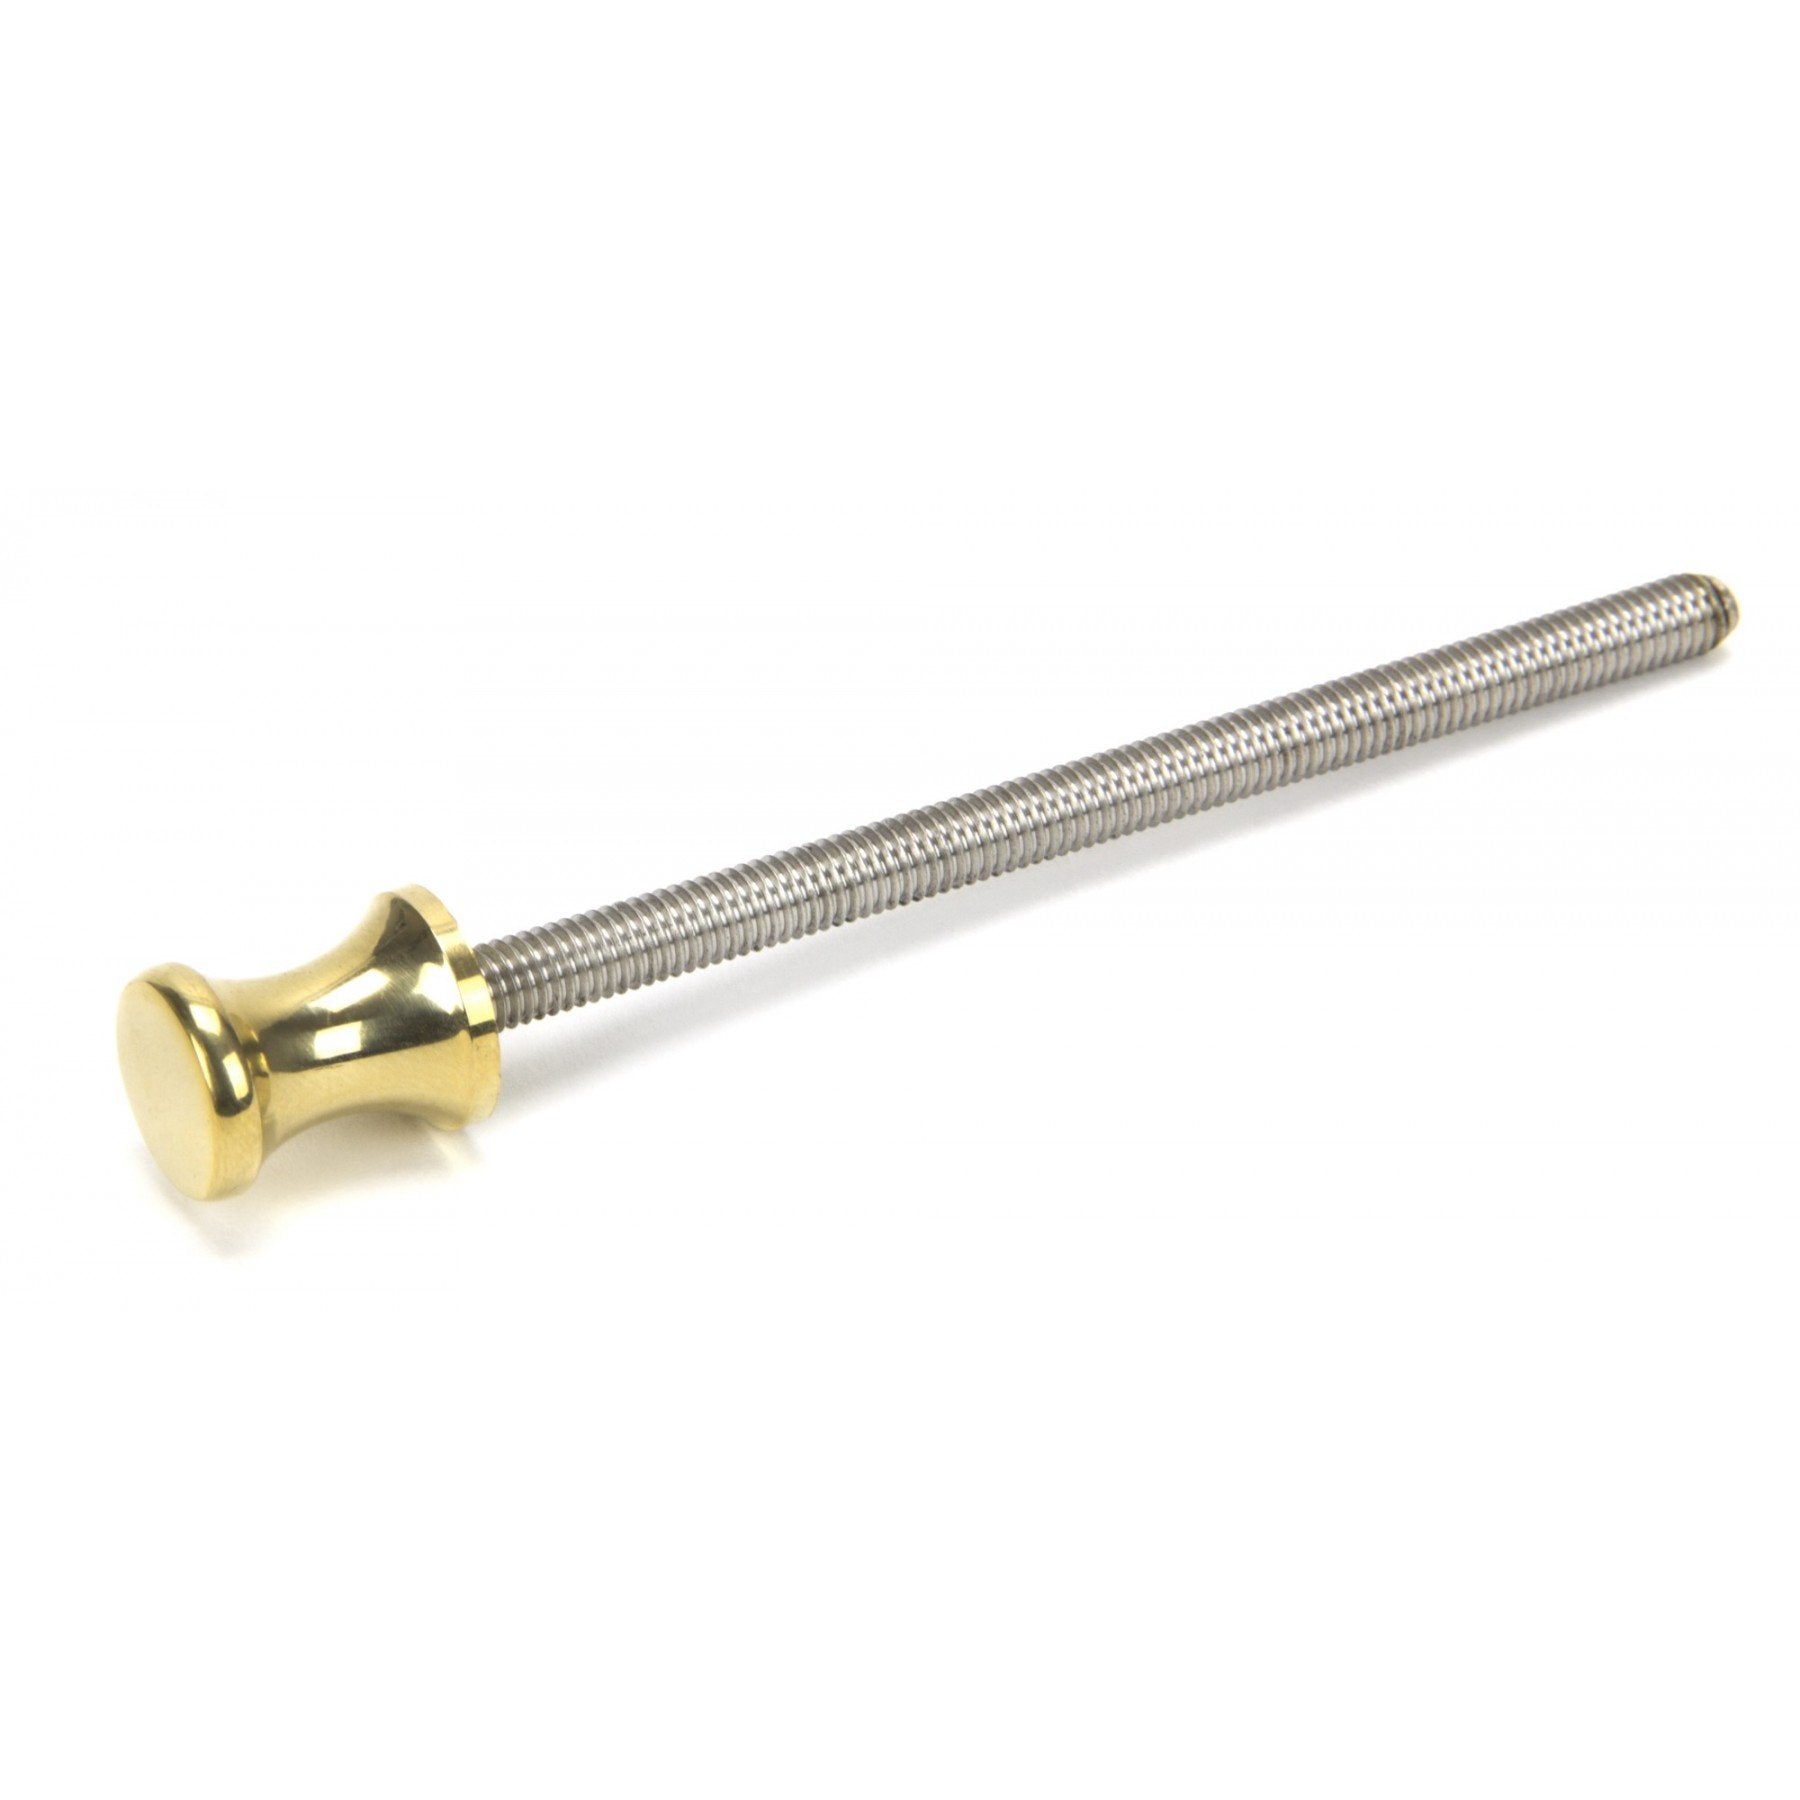 From the Anvil Polished Brass ended SS M6 110mm Threaded Bar